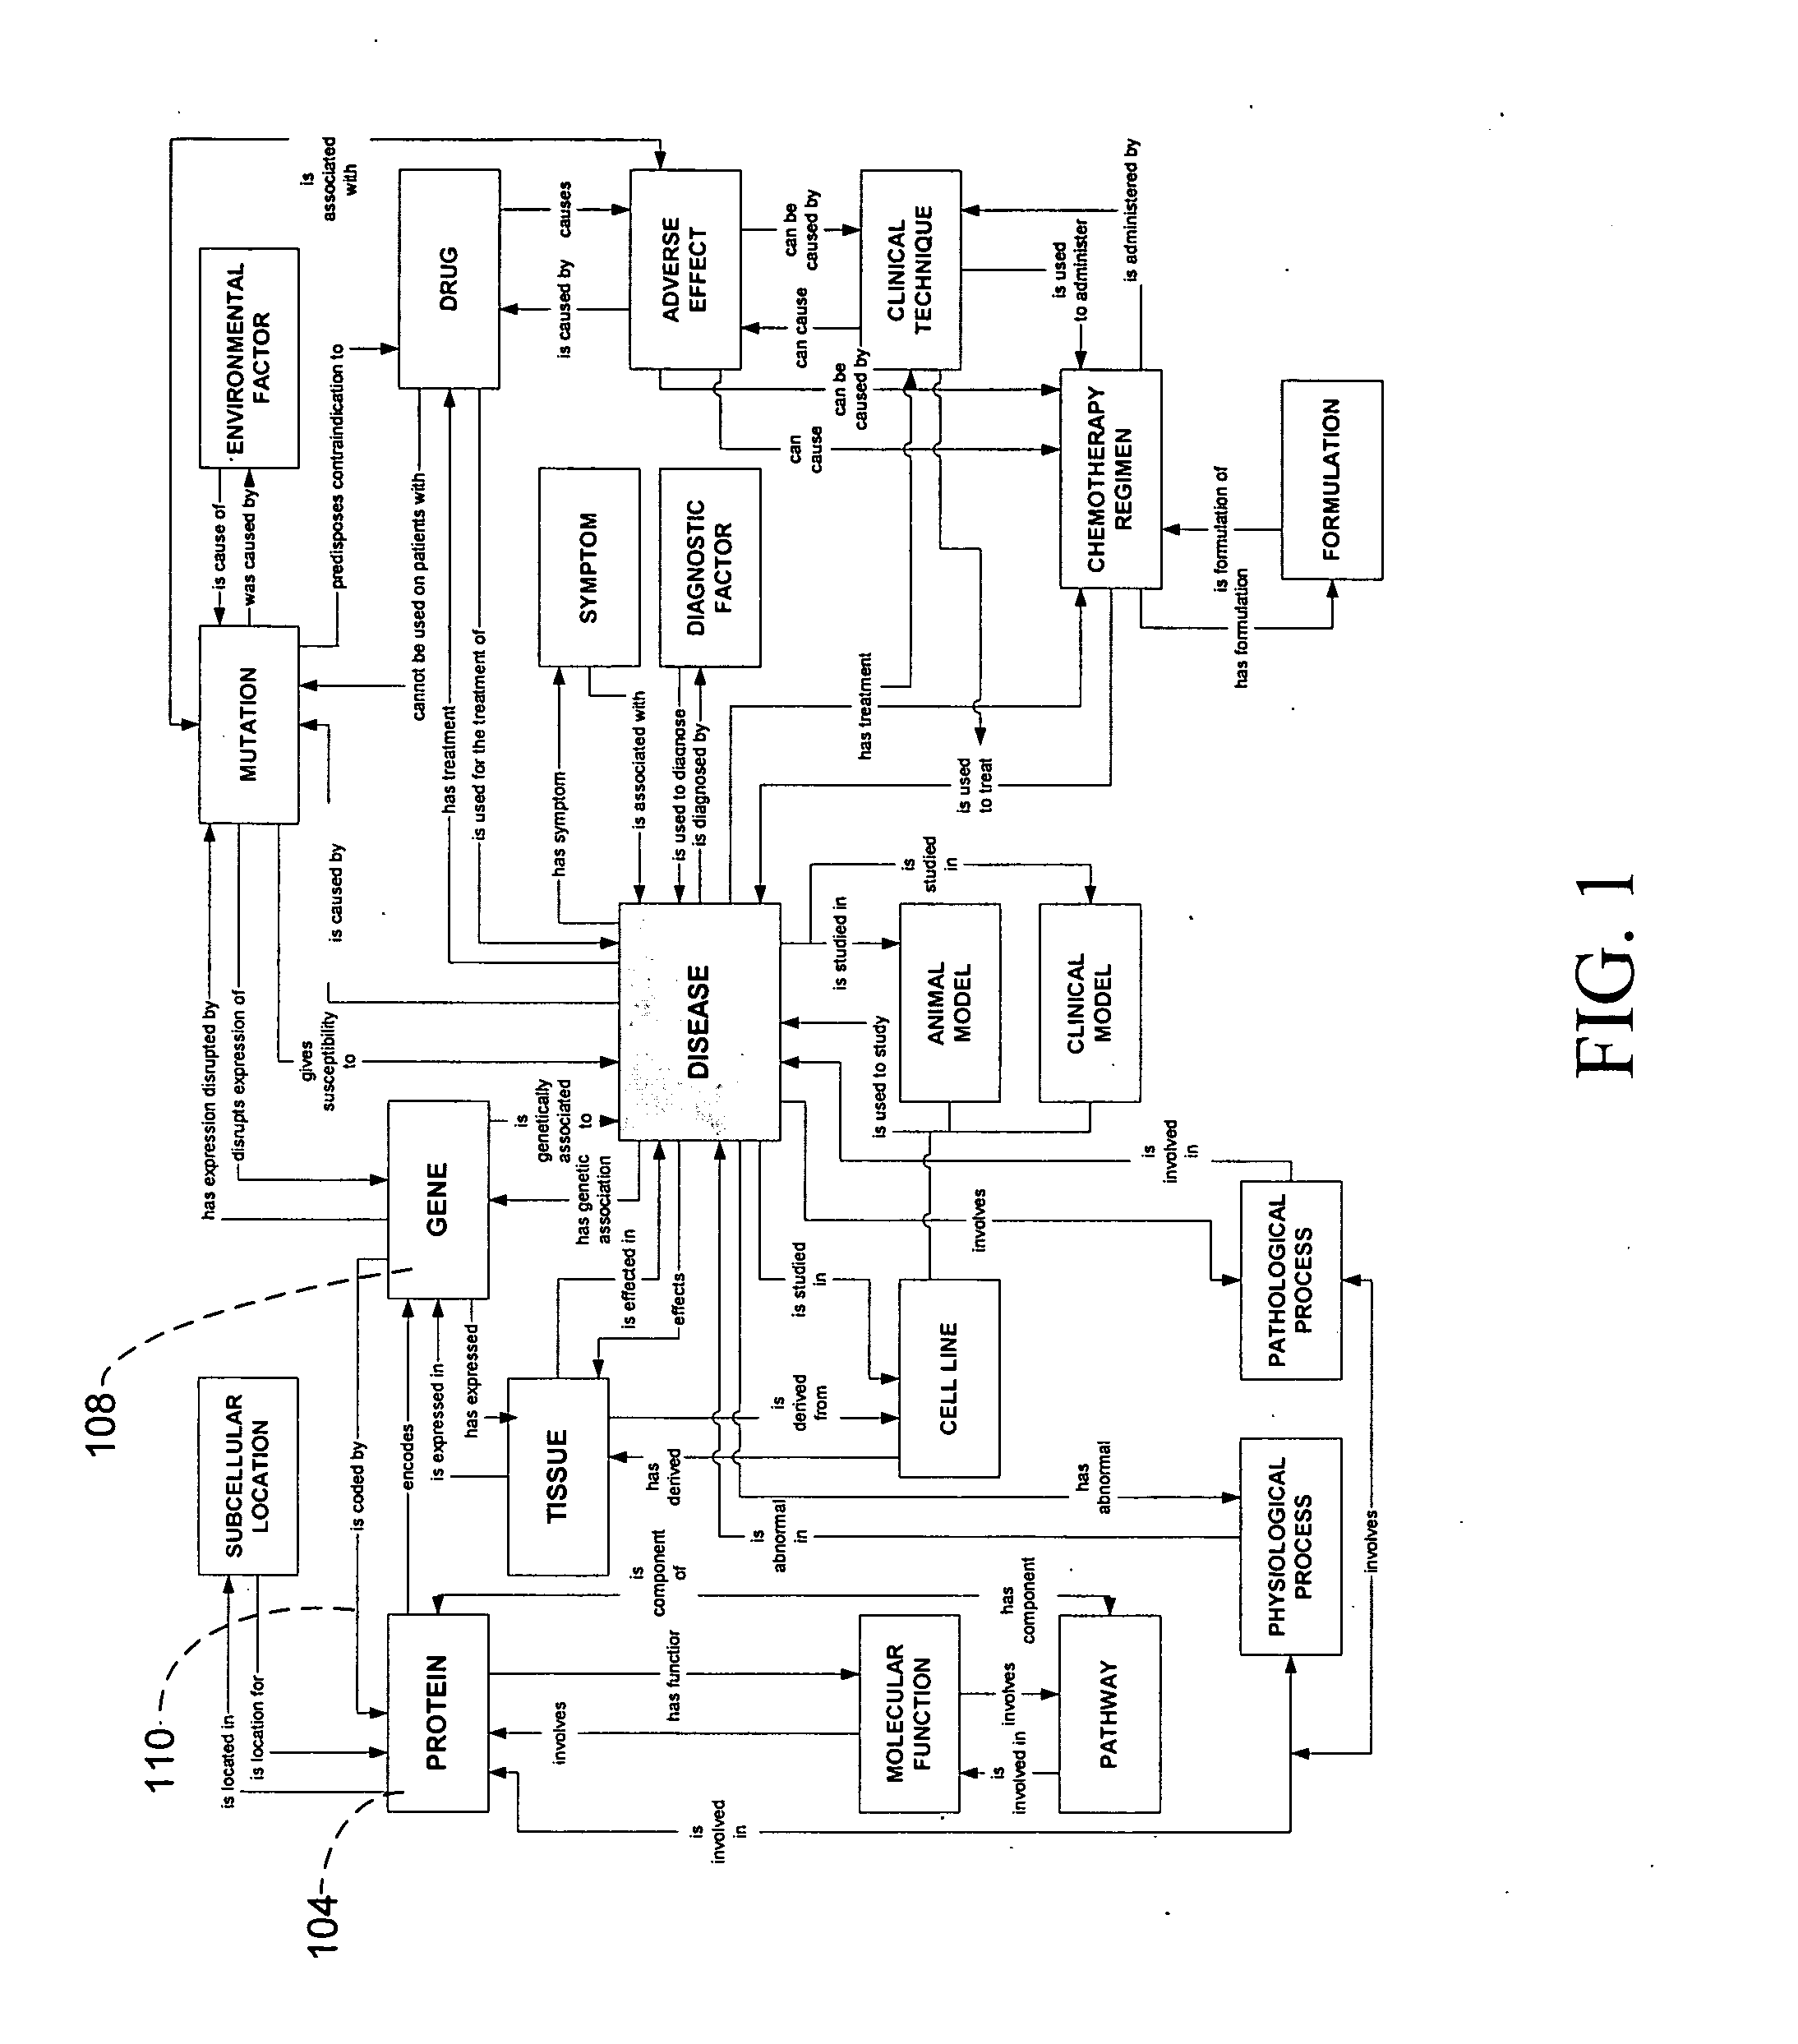 System and method for creating, editing, and utilizing one or more rules for multi-relational ontology creation and maintenance